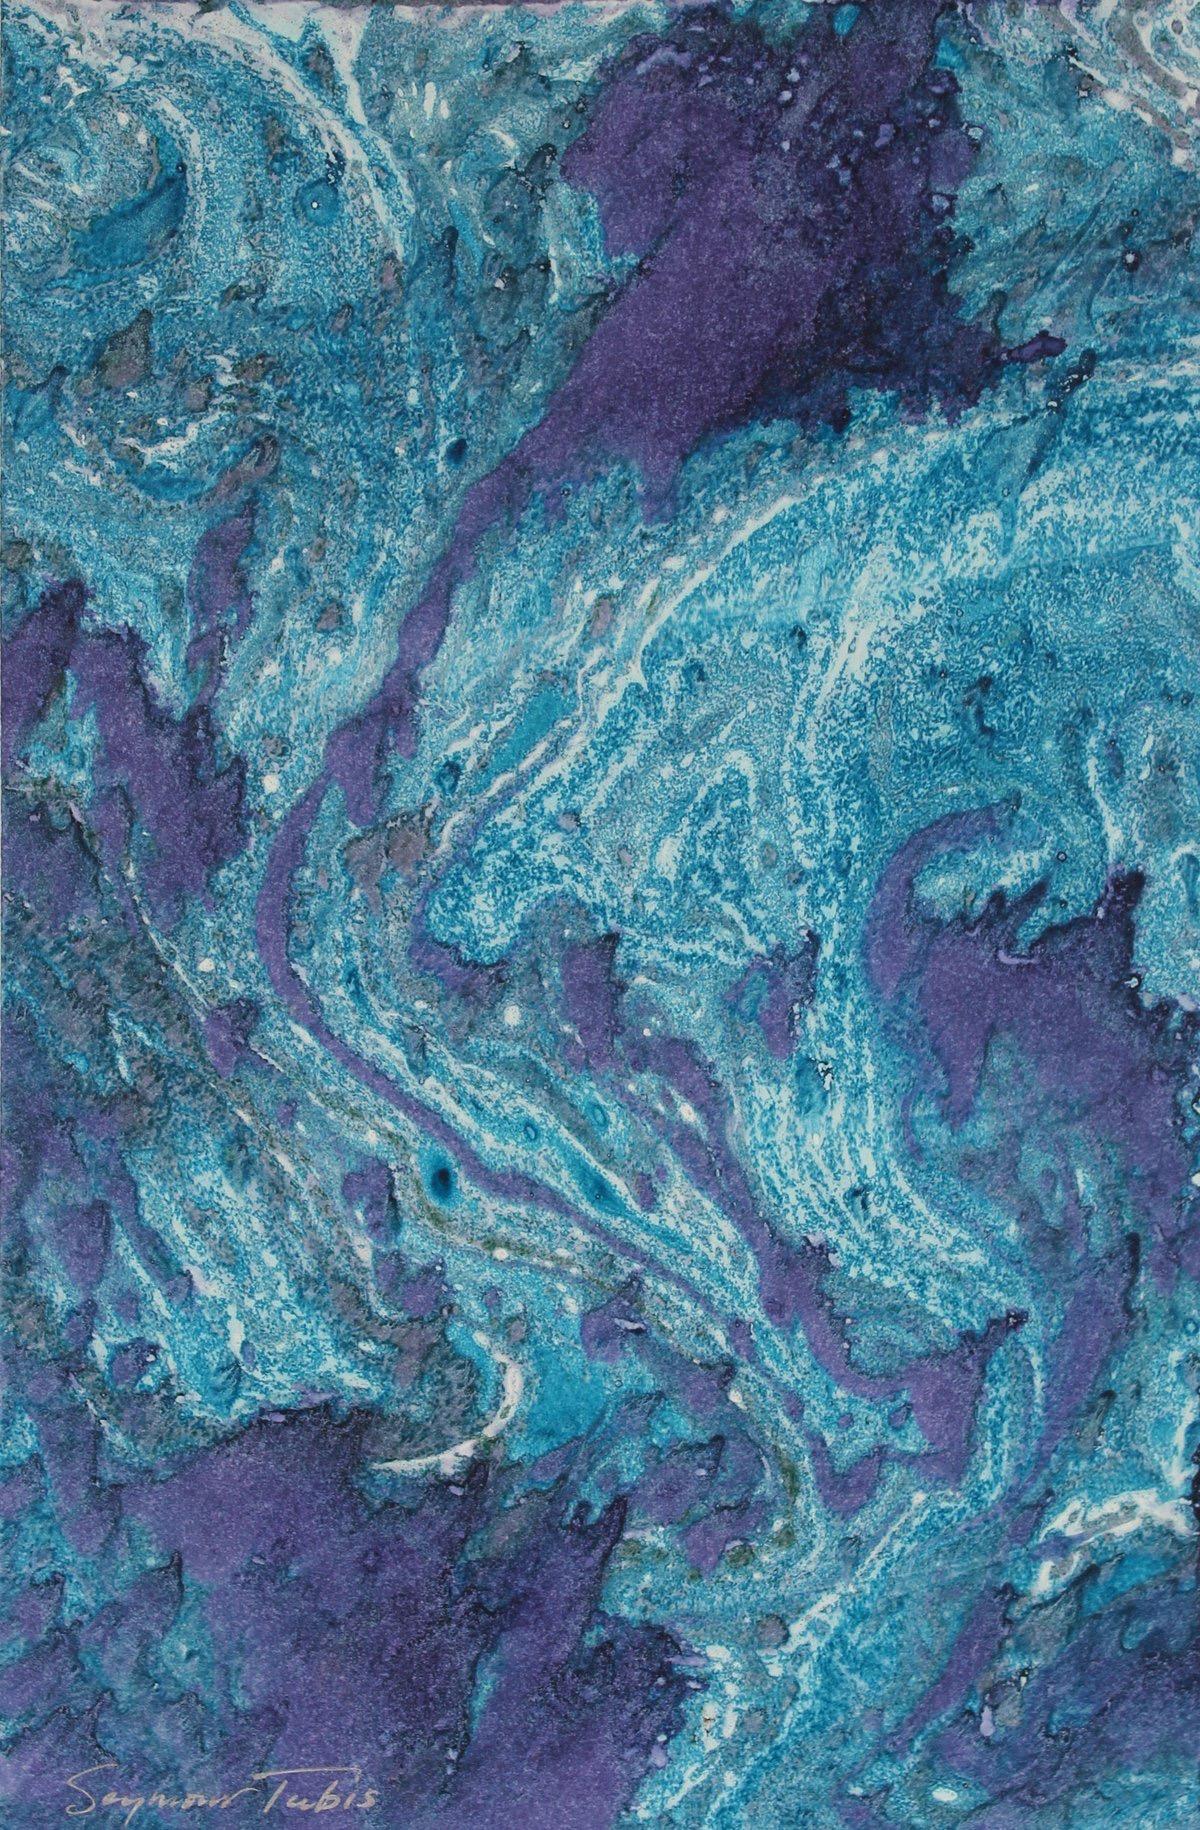 Seymour Tubis Abstract Painting - Abstracted Shades of Blue Oil on Paper Marble Painting 